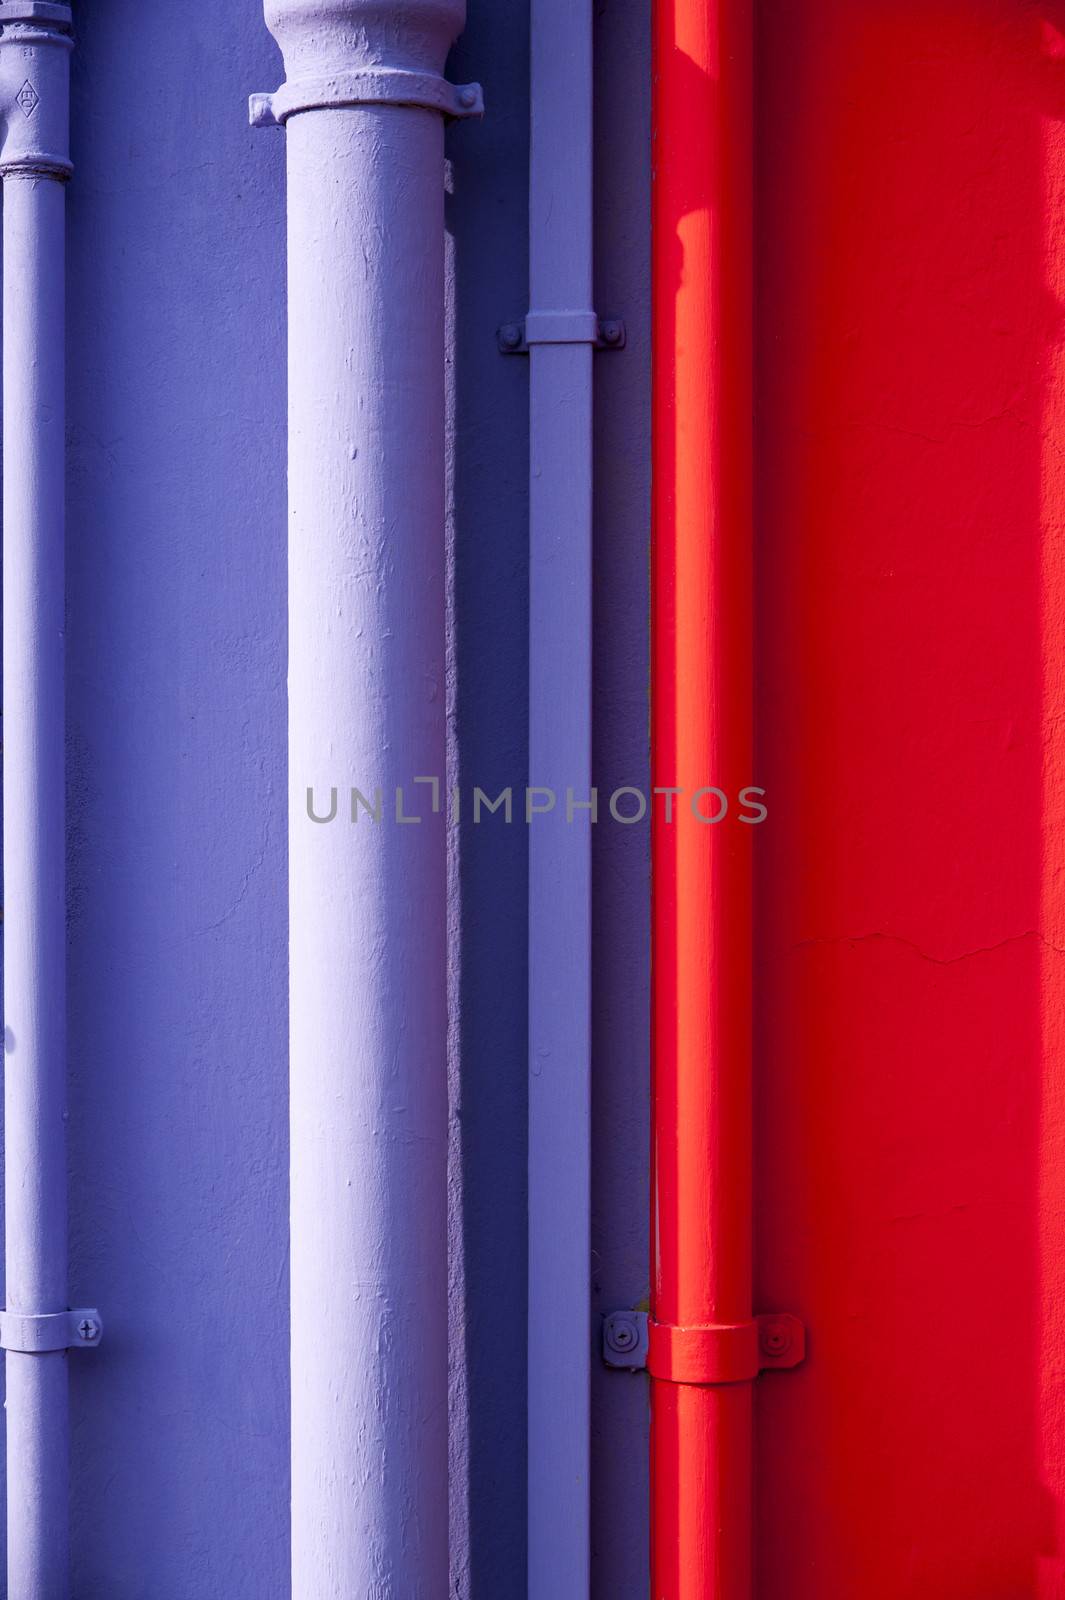 Blue and red tubes on colorful wall